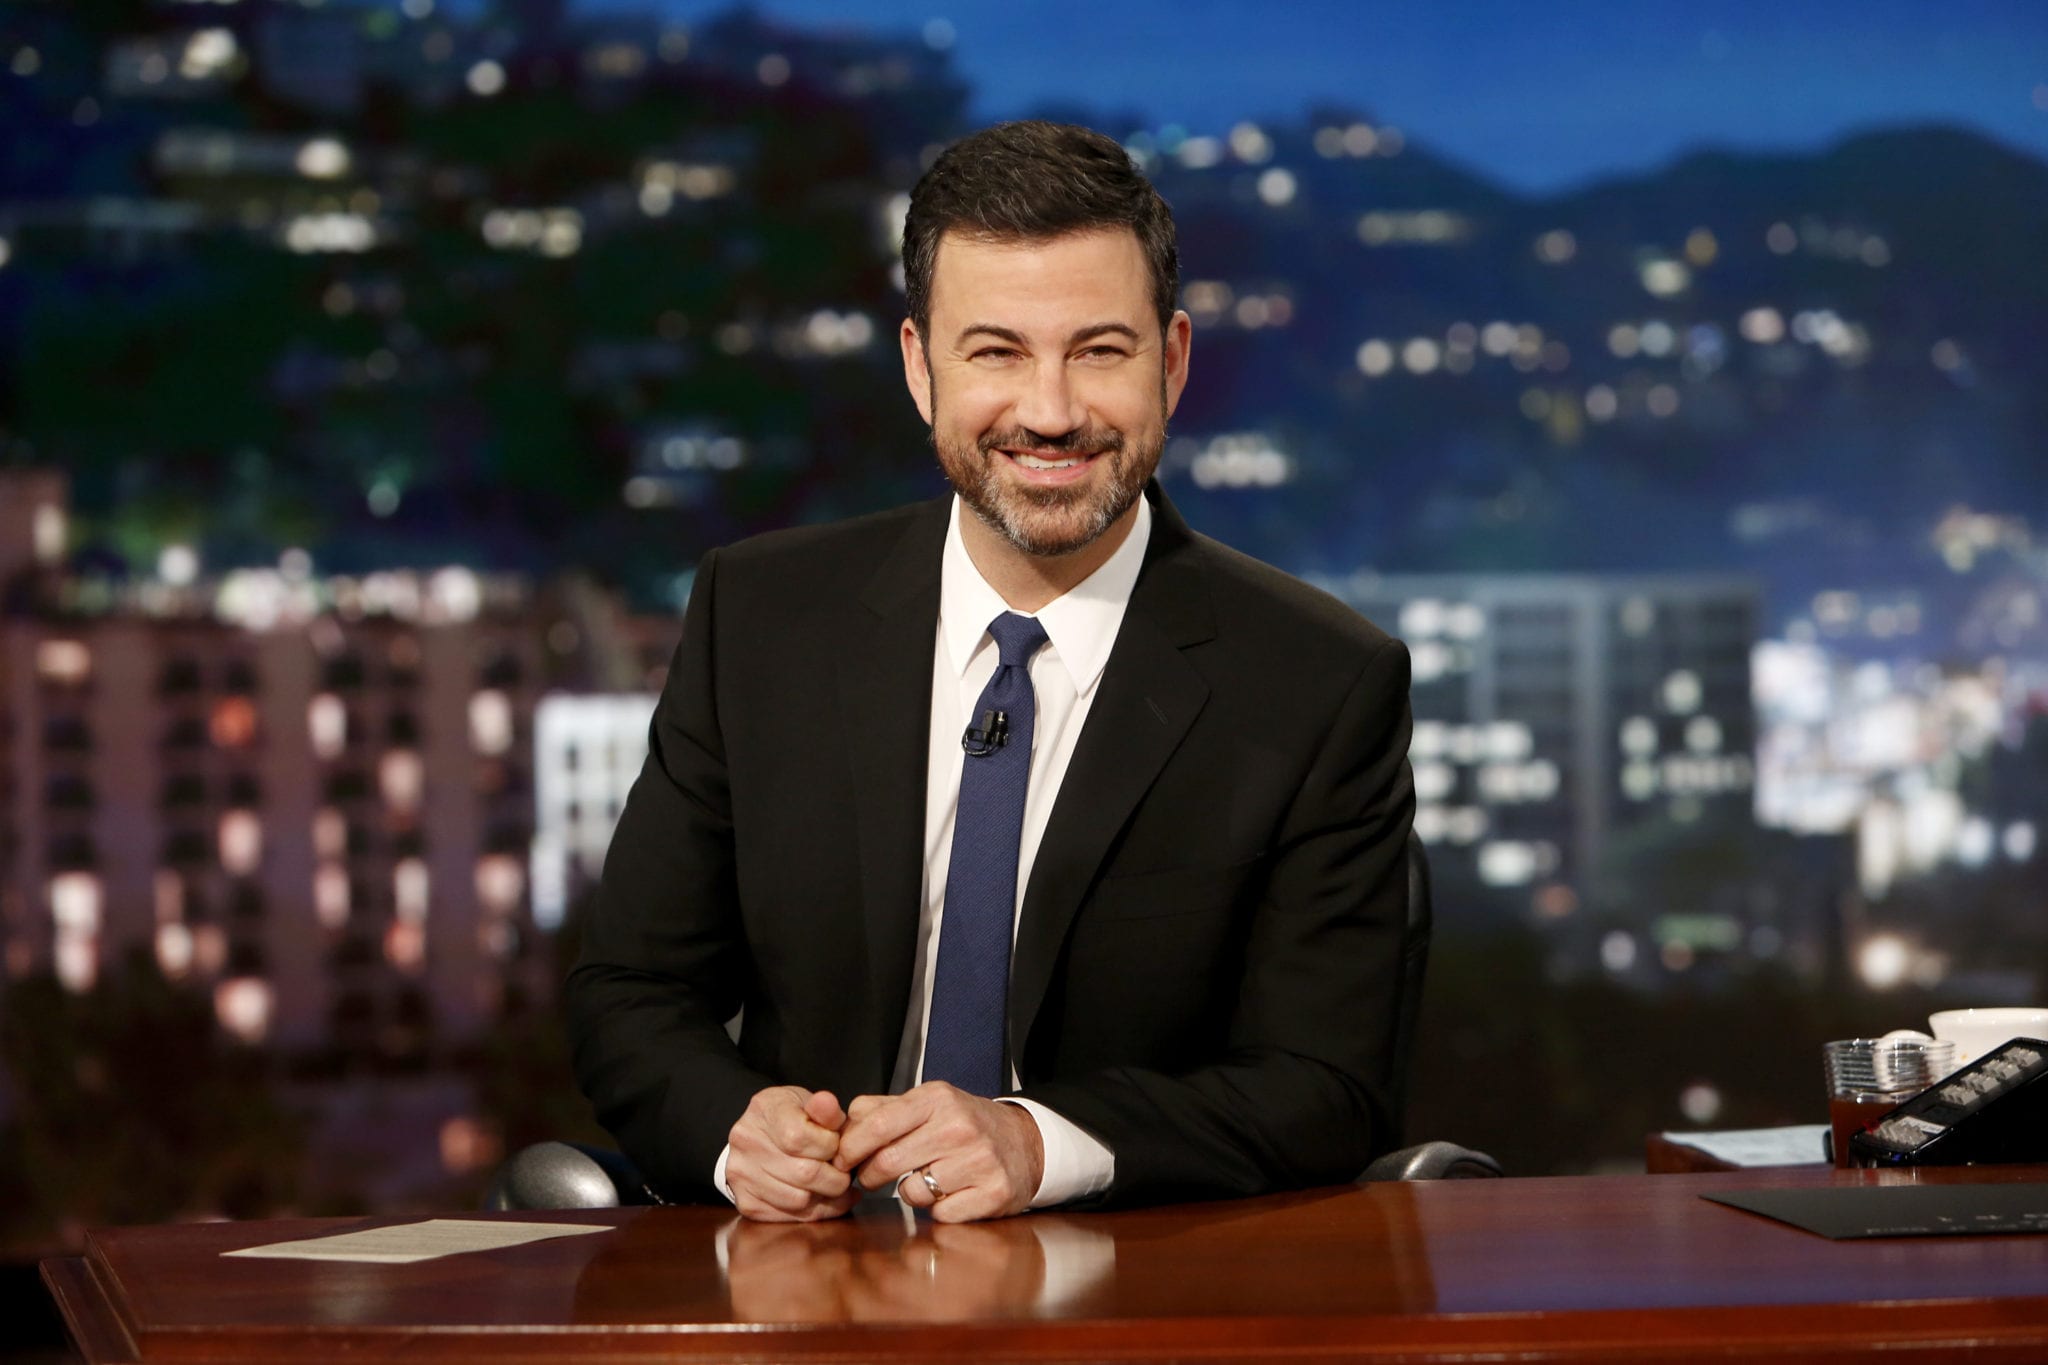 Do guests get paid on Jimmy Kimmel?